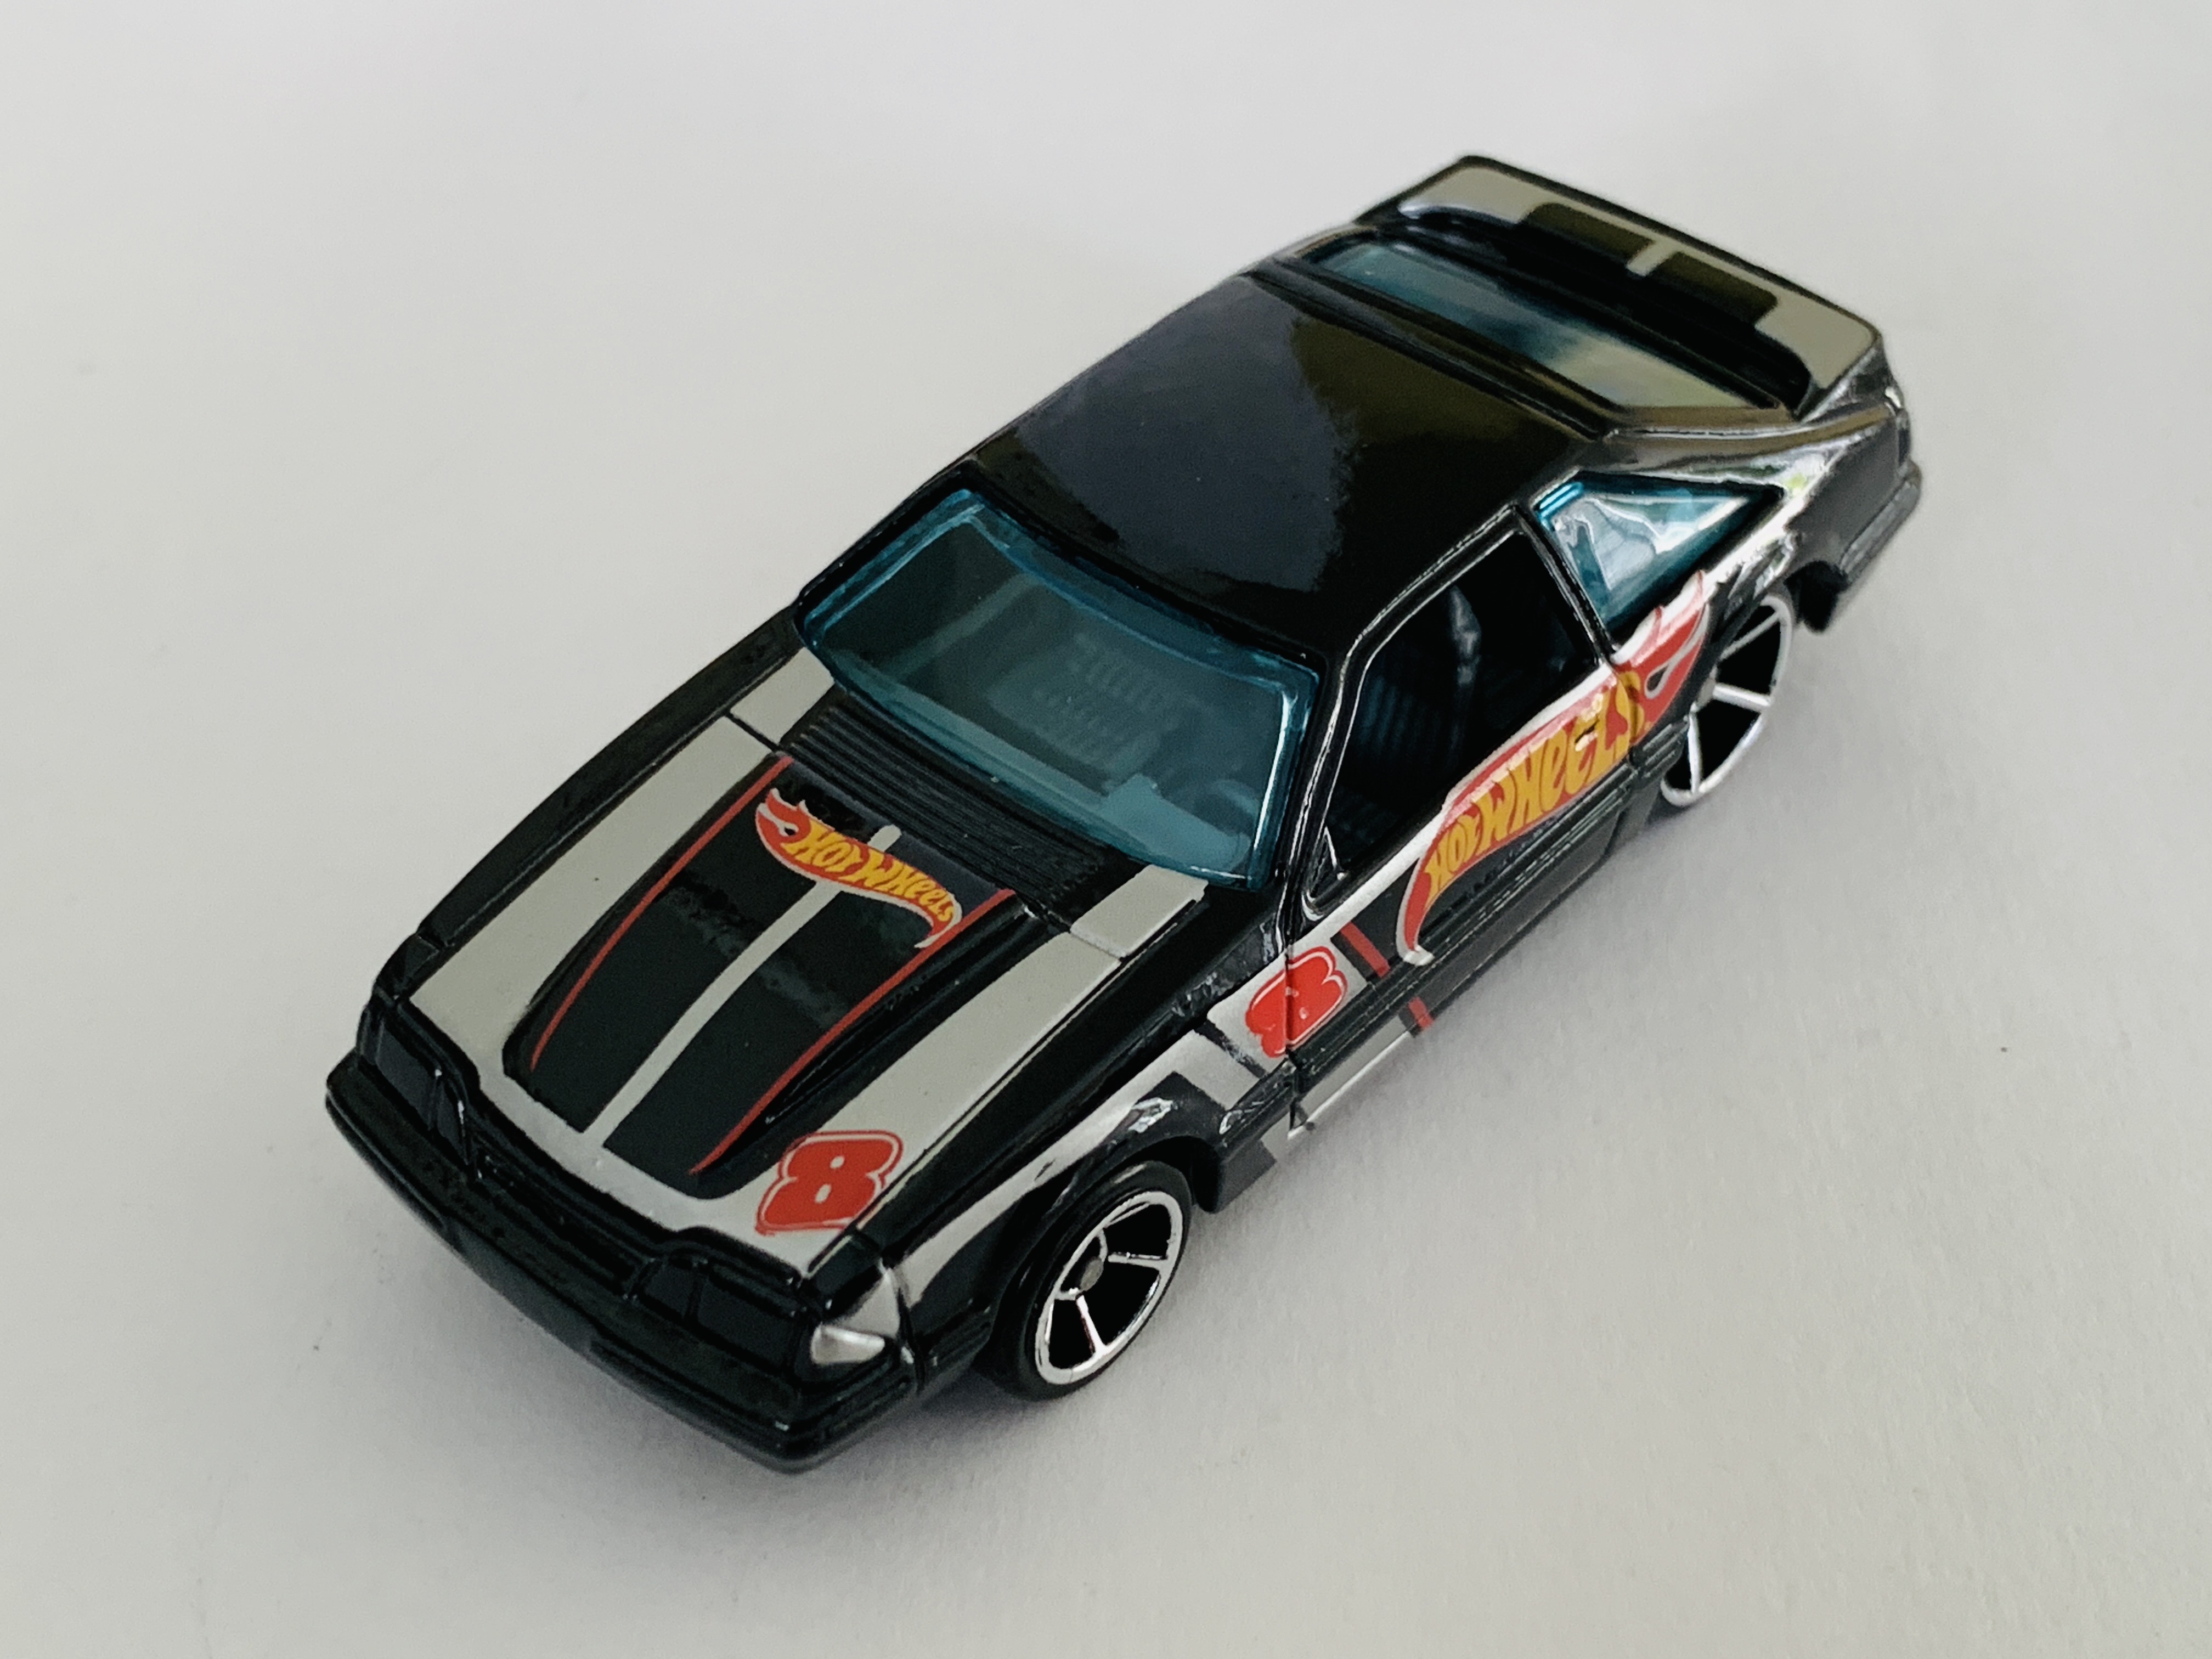 Hot Wheels '92 Ford Mustang Mystery Car